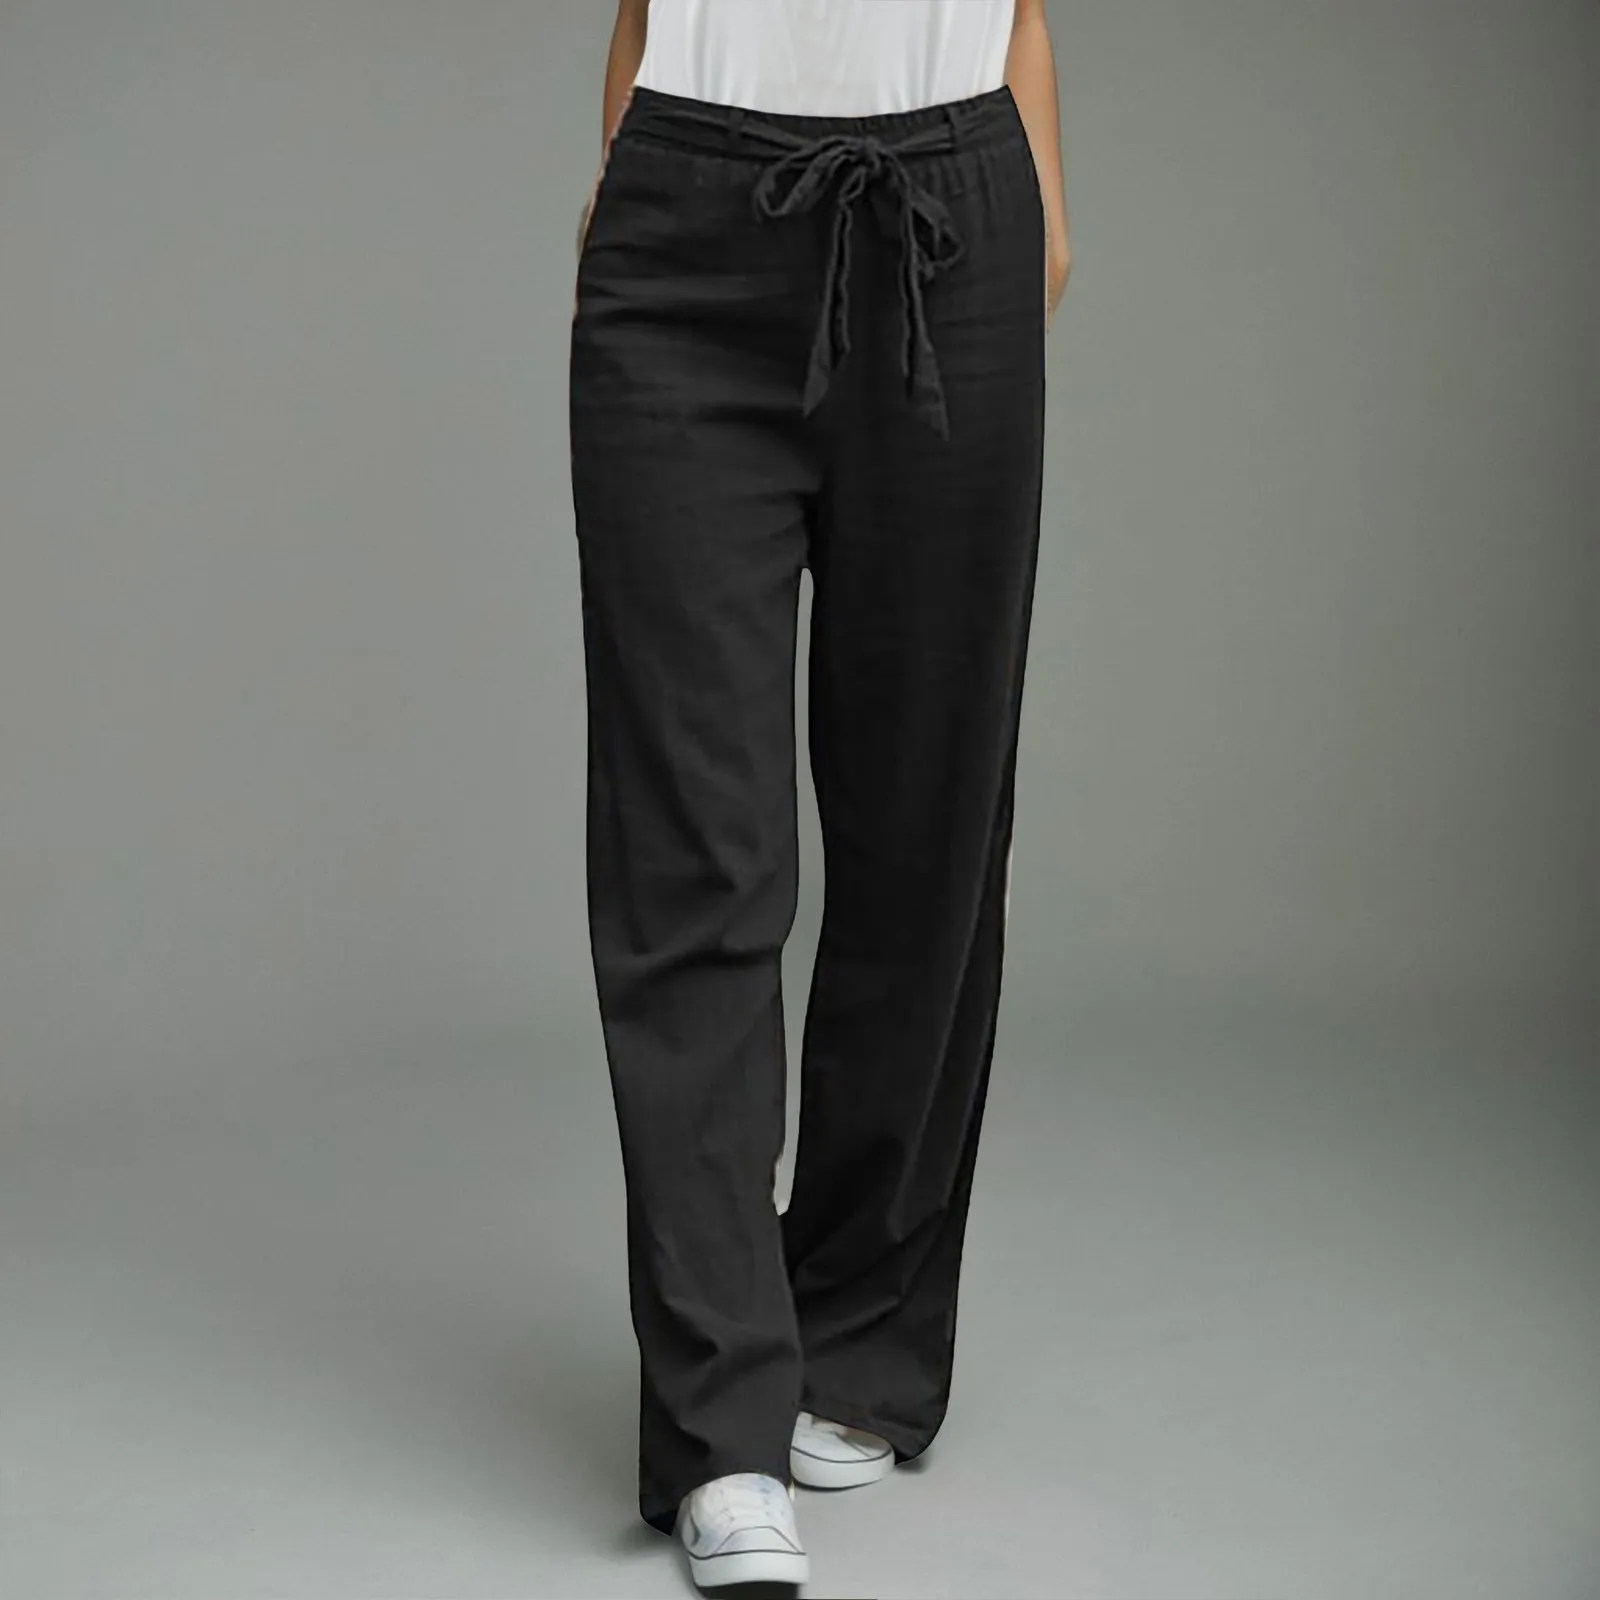 Summer Cargo Pants Women Plus Size High Waisted Tied Belt Palazzo Pants Baggy Flowy Beach Pants With Pockets Women's Pants